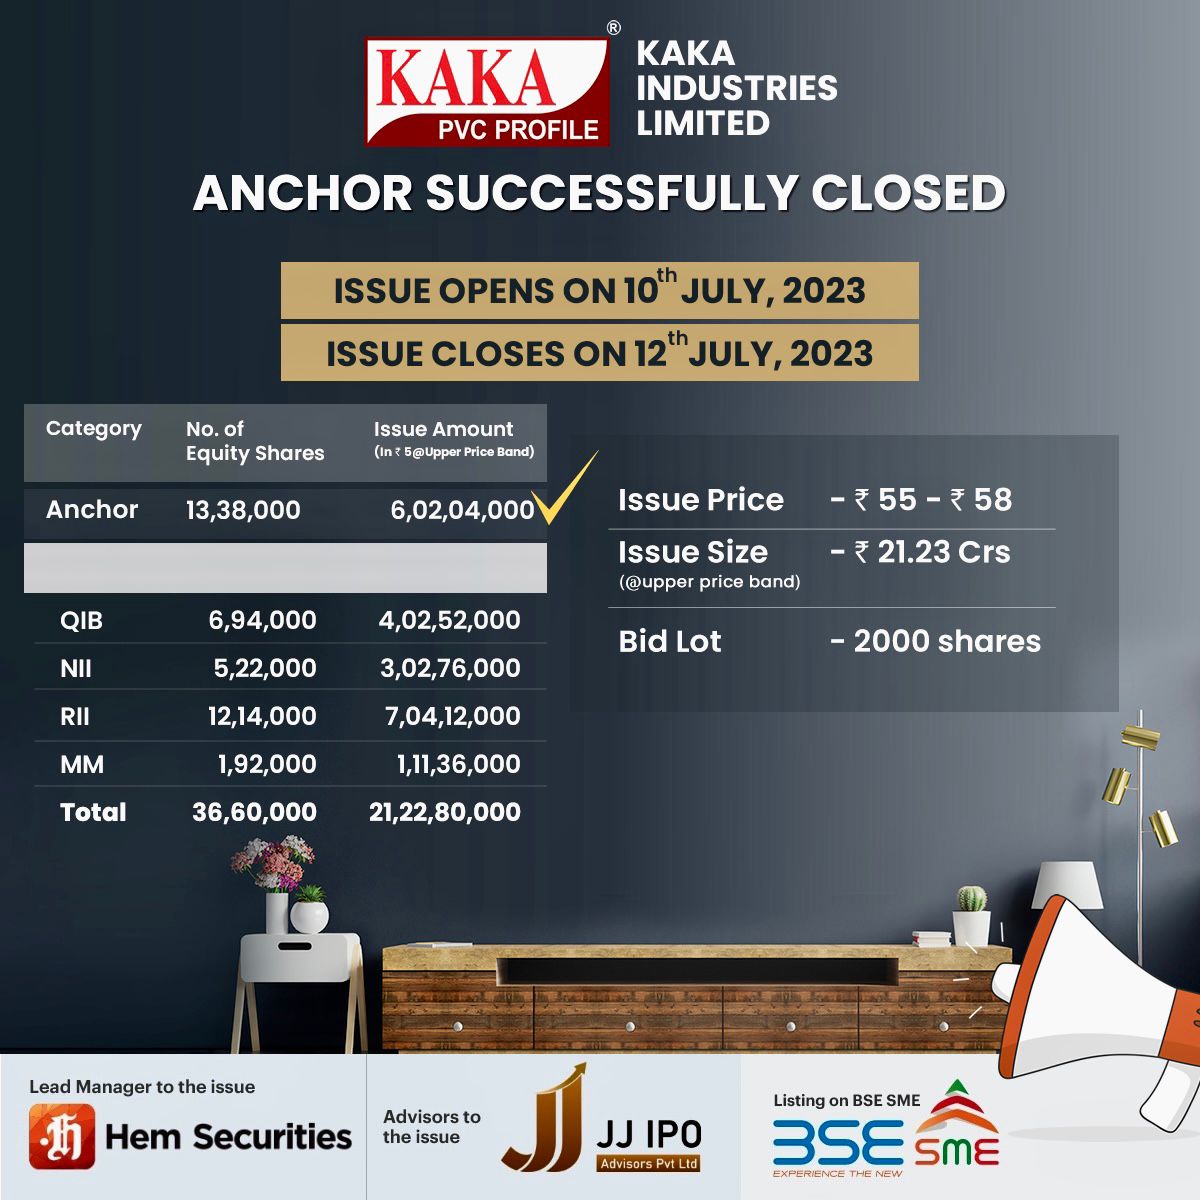 🌟 Exciting News! 🌟 JJ IPO Advisors, the trusted advisors to issuers, is thrilled to announce the successful closure of Anchor Book of KAKA Industries Limited Today. 🎉

#JJIPOAdvisors #KAKAIndustriesltd #kakasme #kaka #IPOsuccess #CapitalMarkets #FinancialGrowth